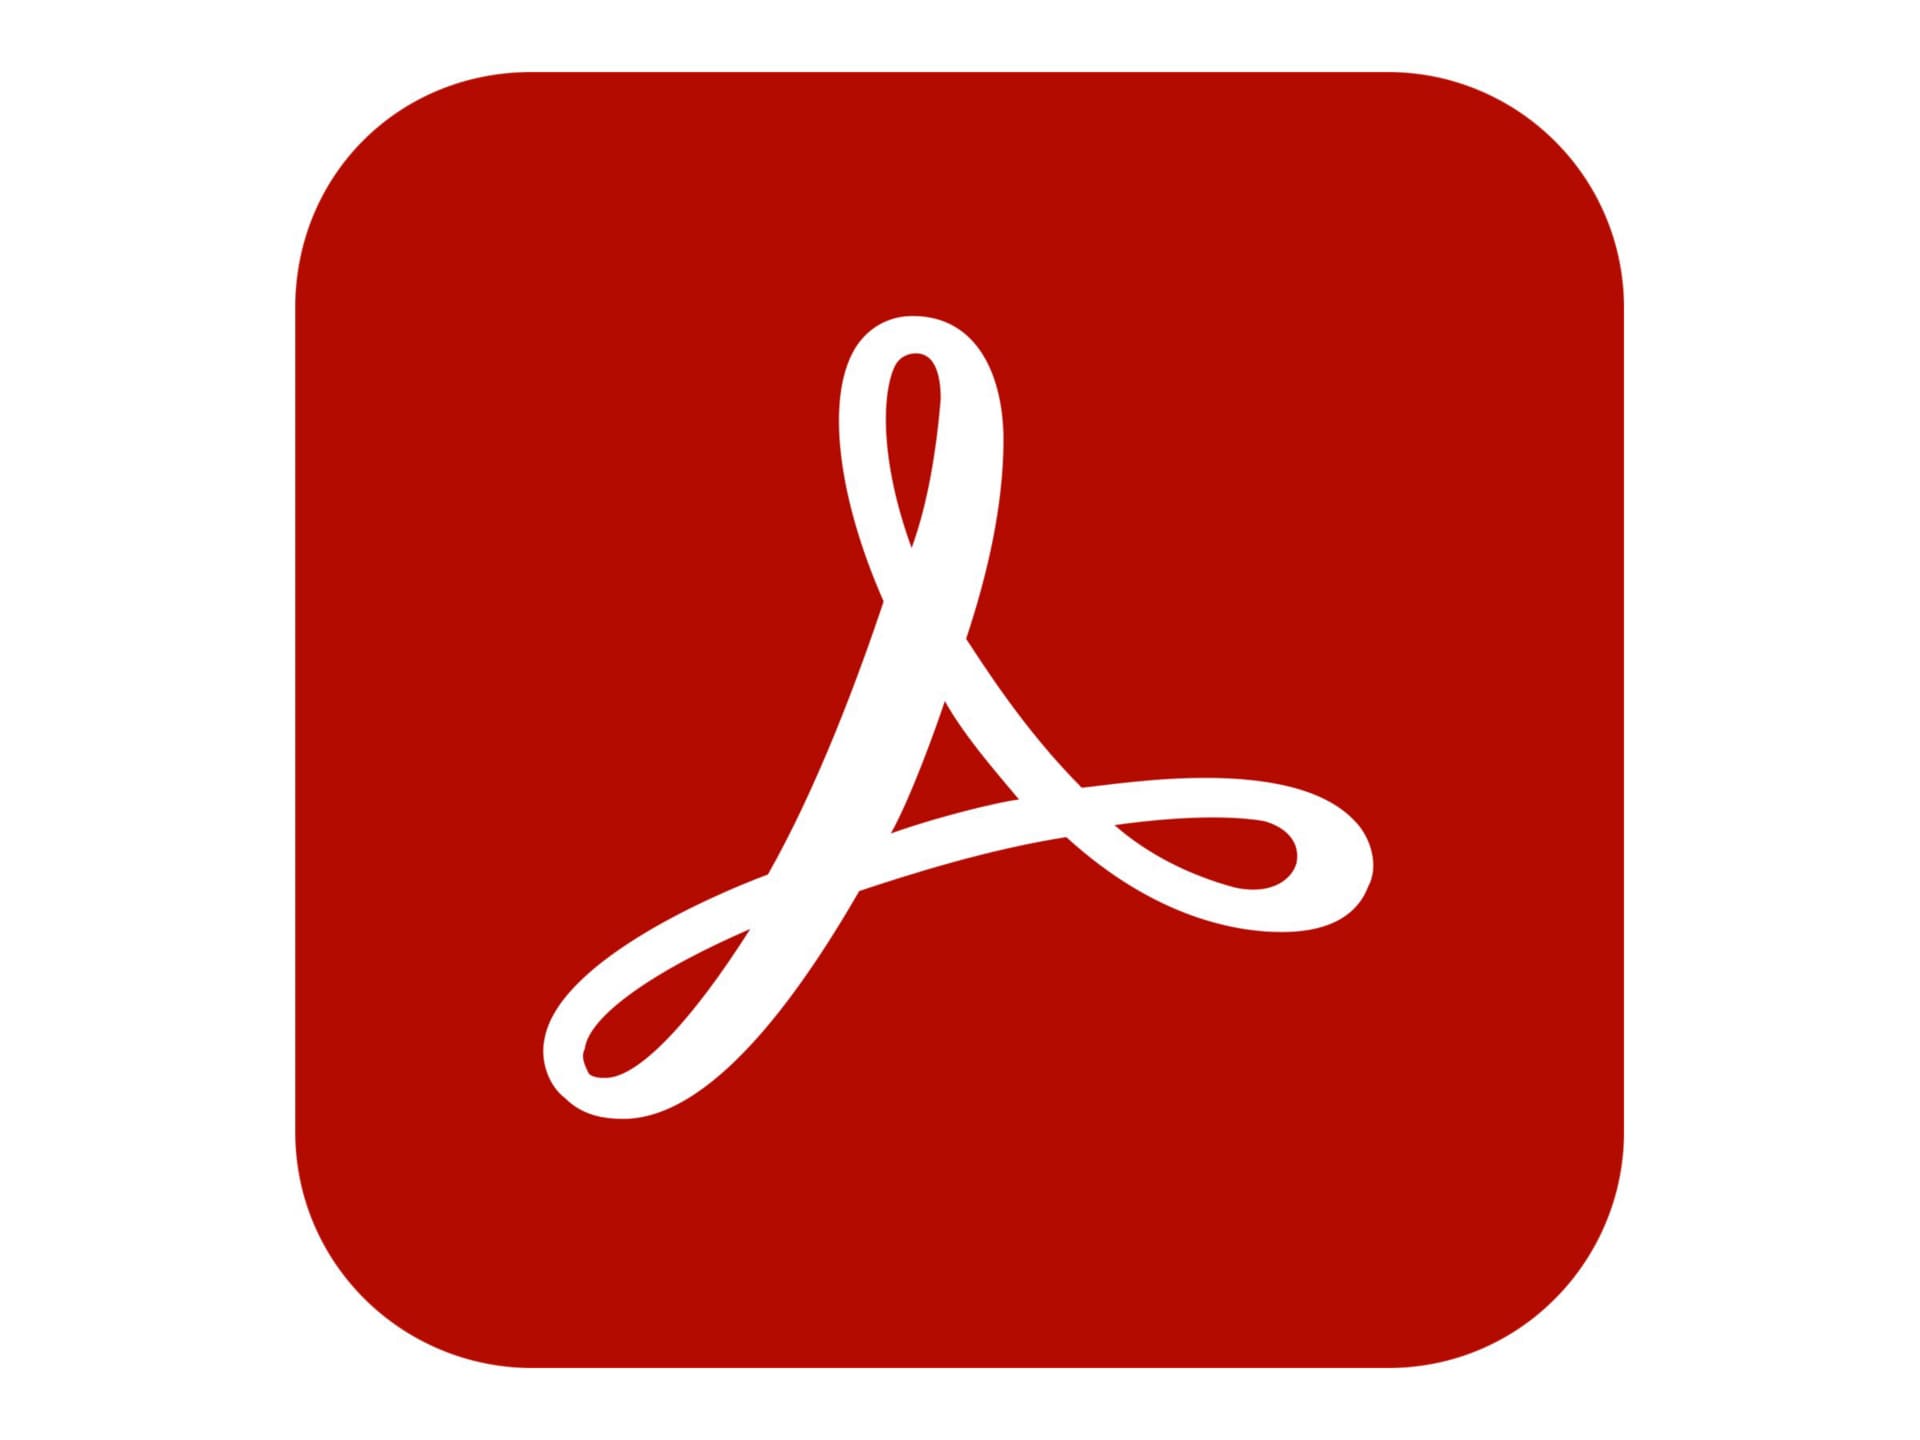 Adobe Acrobat Pro for teams - Subscription New (11 months) - 1 named user